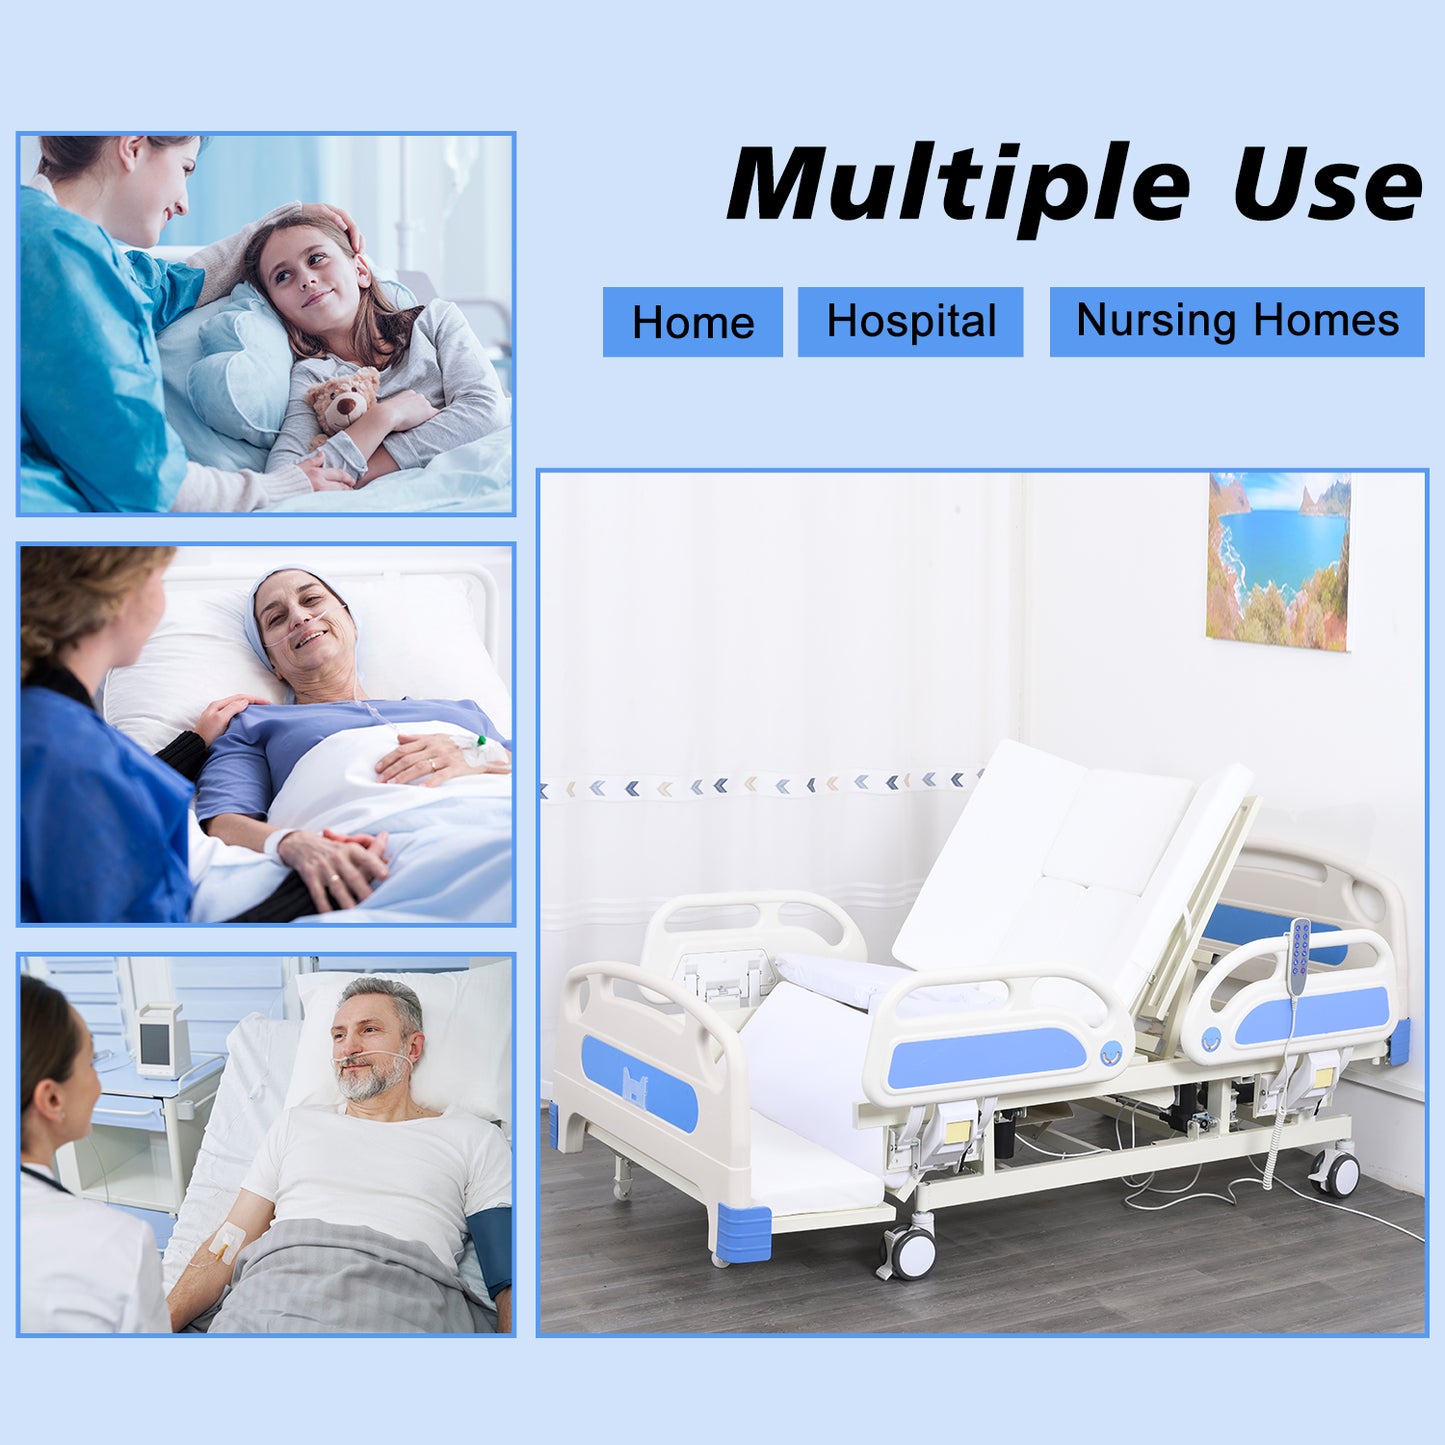 4-Function Remote Control Electric Hospital Bed w/ Full-Length ABS Guardrails, S/S IV Pole, Wash Basin, Bedpan, and Removable Table